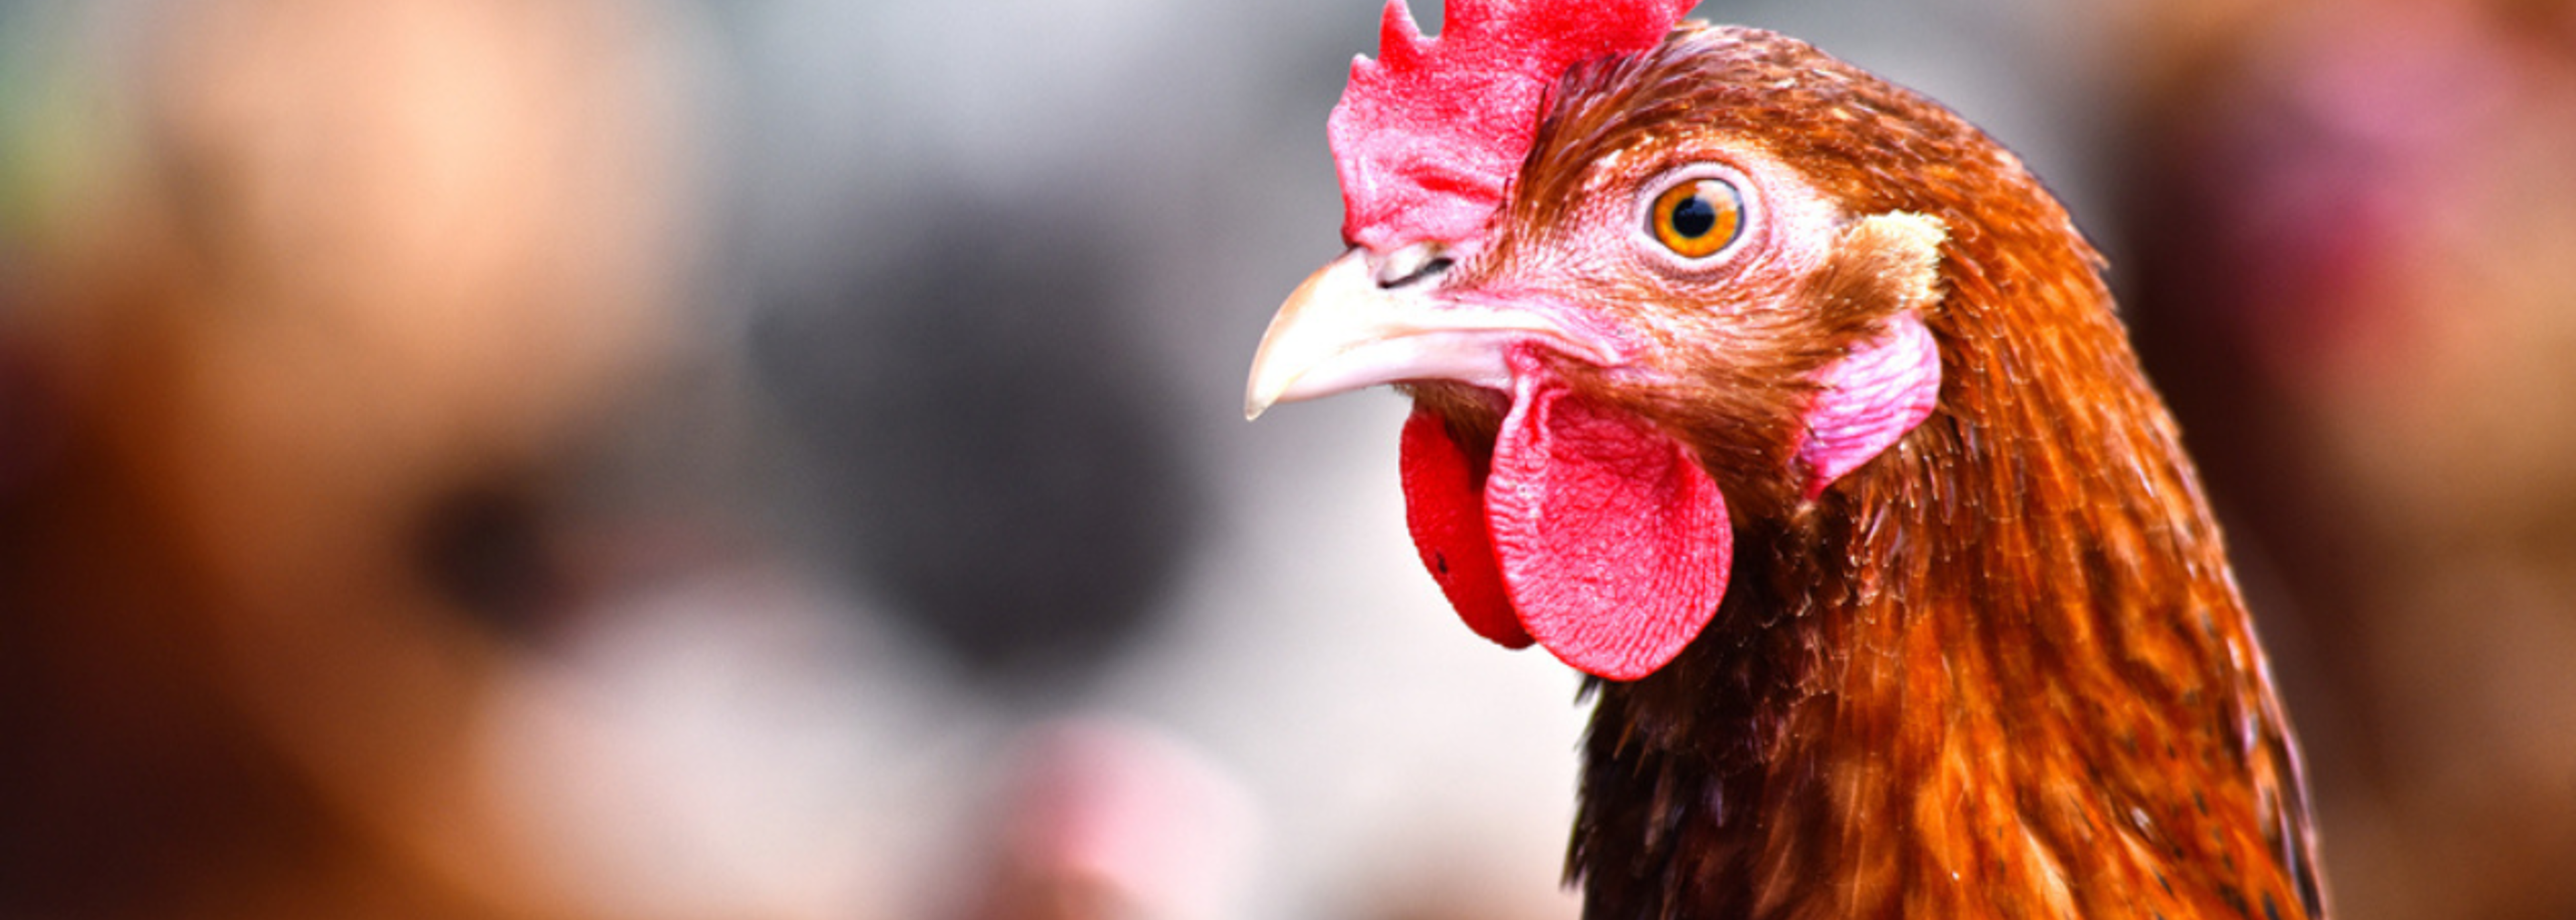 Chickens treated with antibiotics could compromise human health